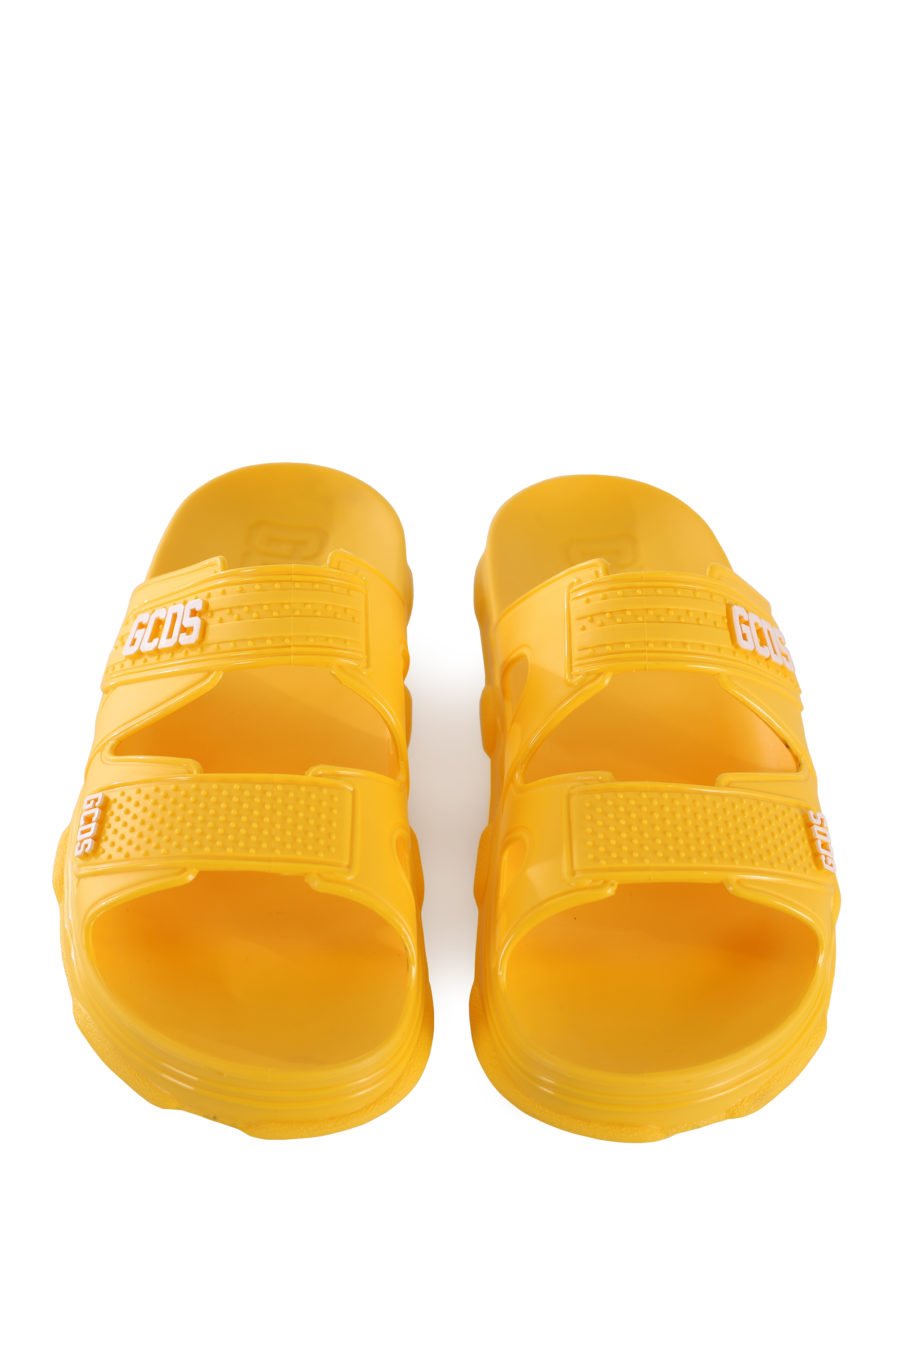 Yellow rubber flip flops with white logo - IMG 1673